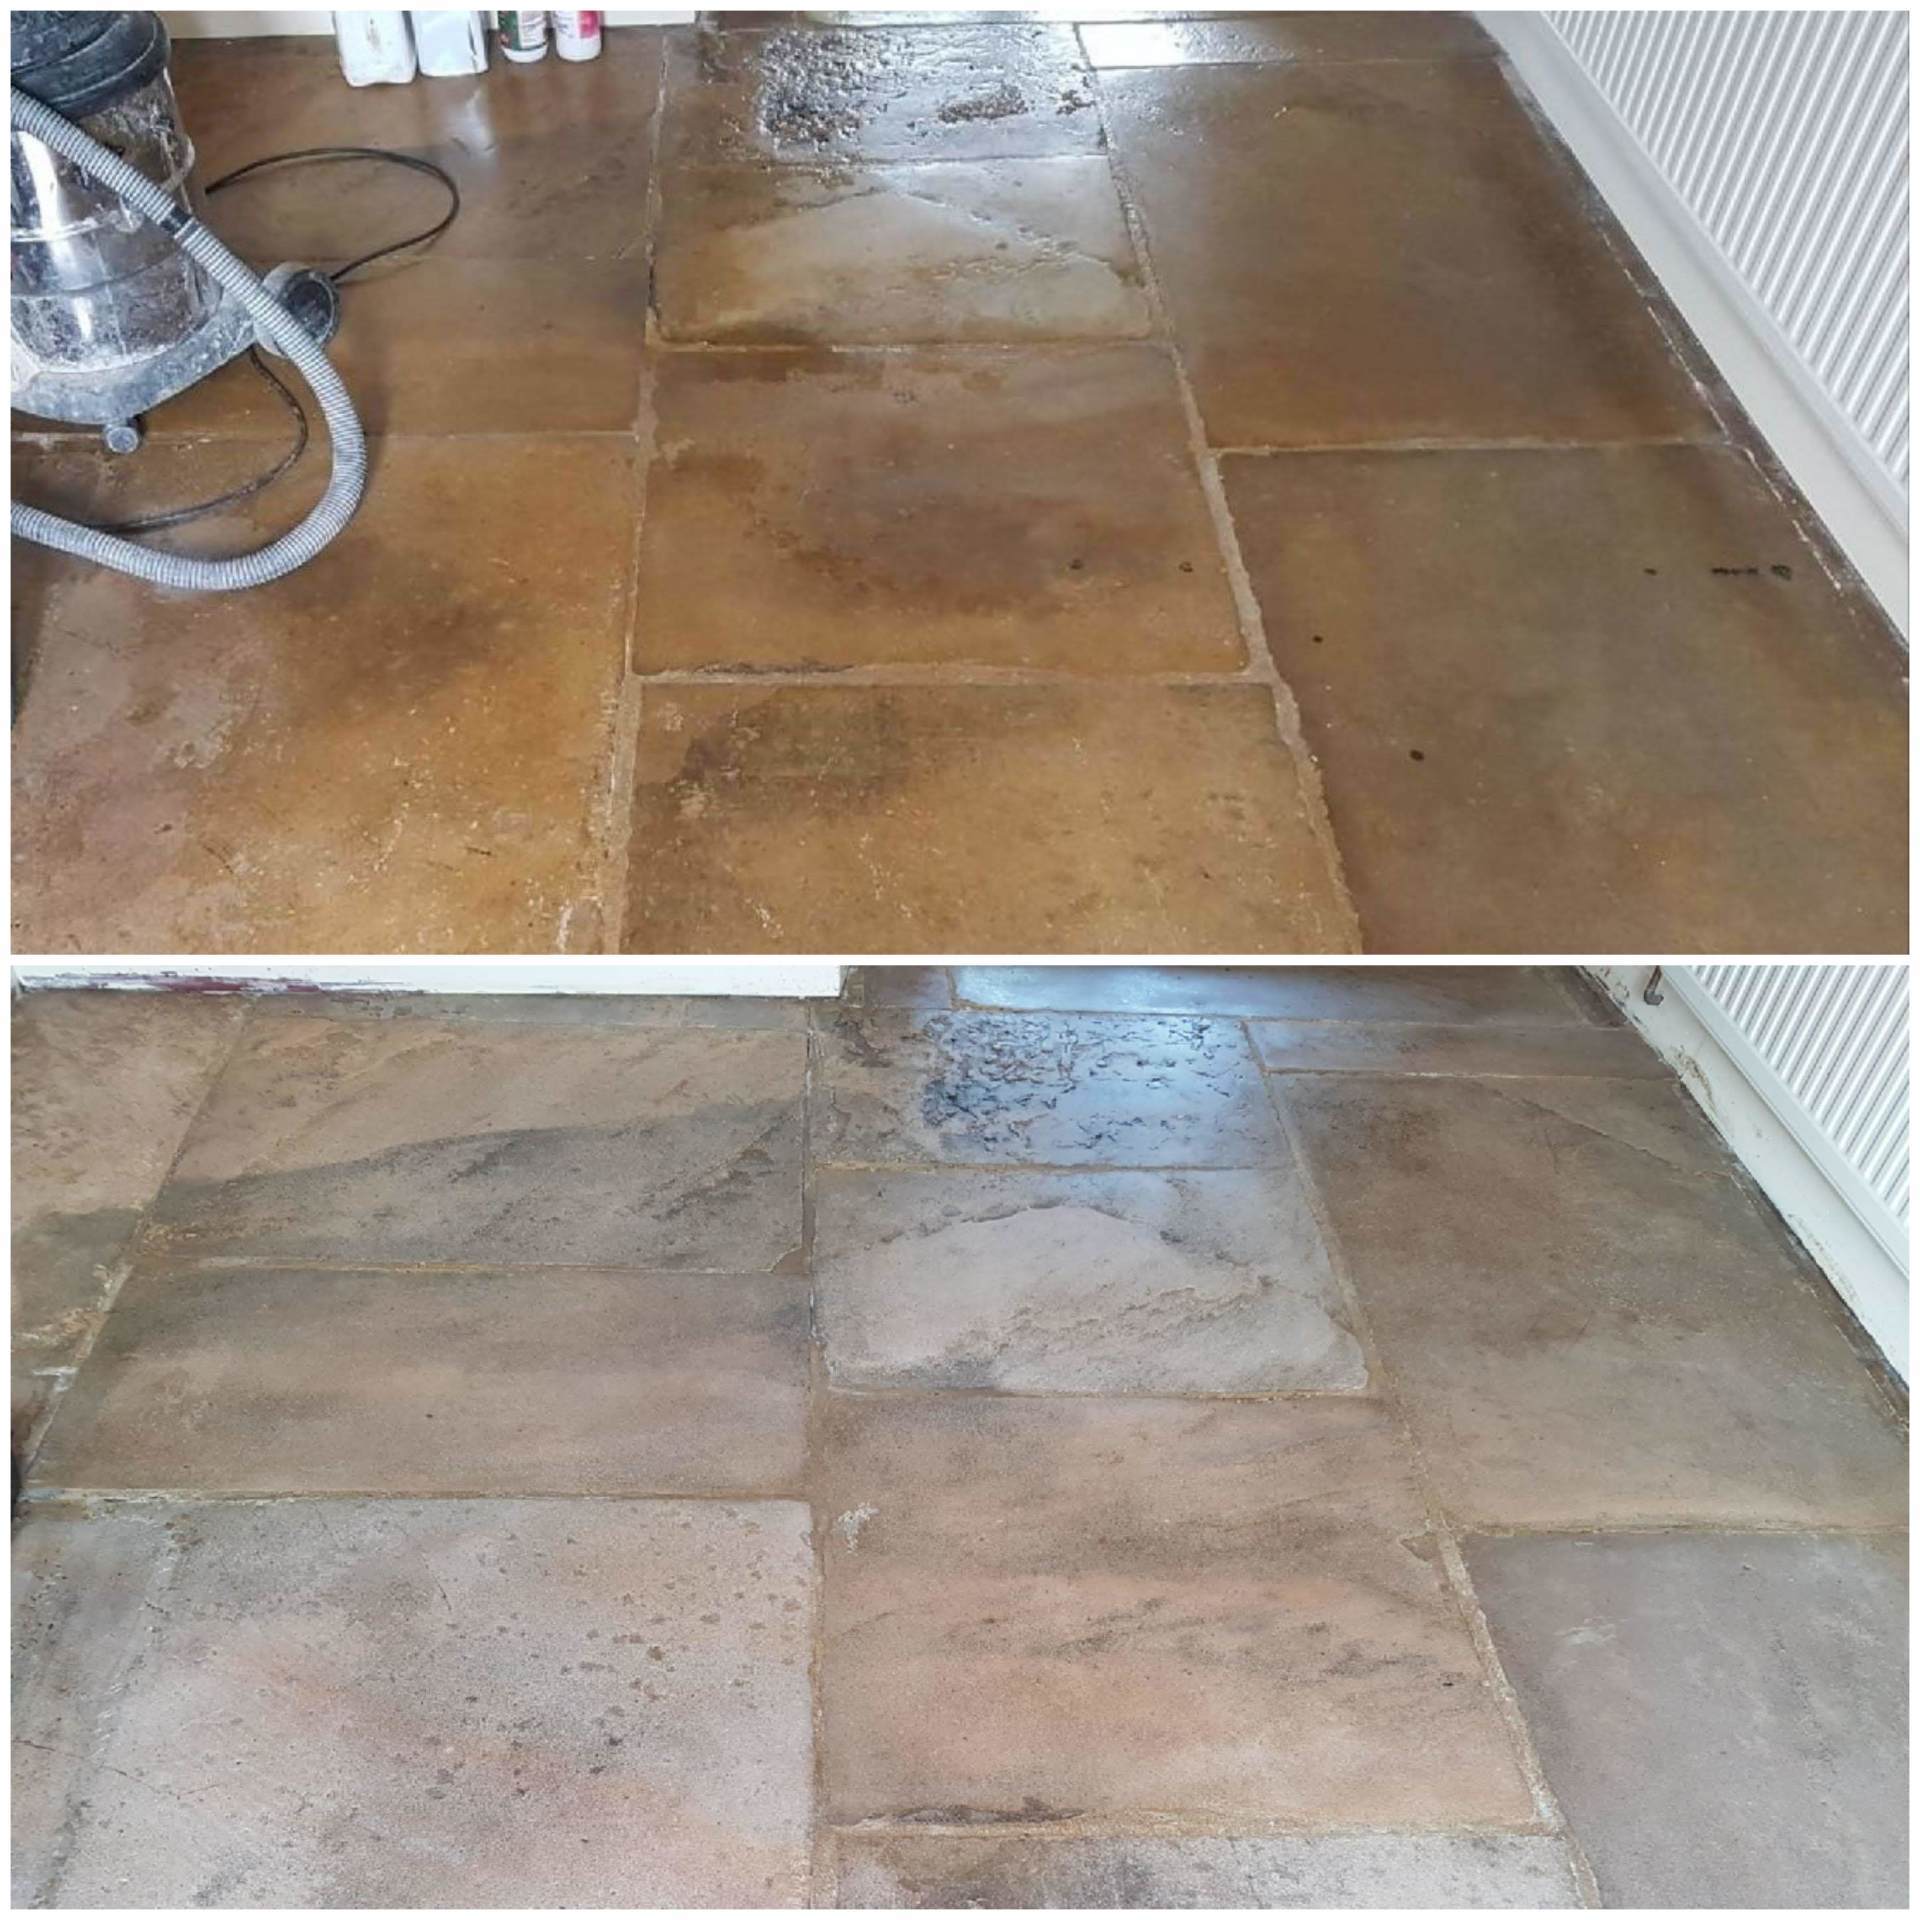 Flagstone Cleaning and Sealing in Matlock, Derbyshire